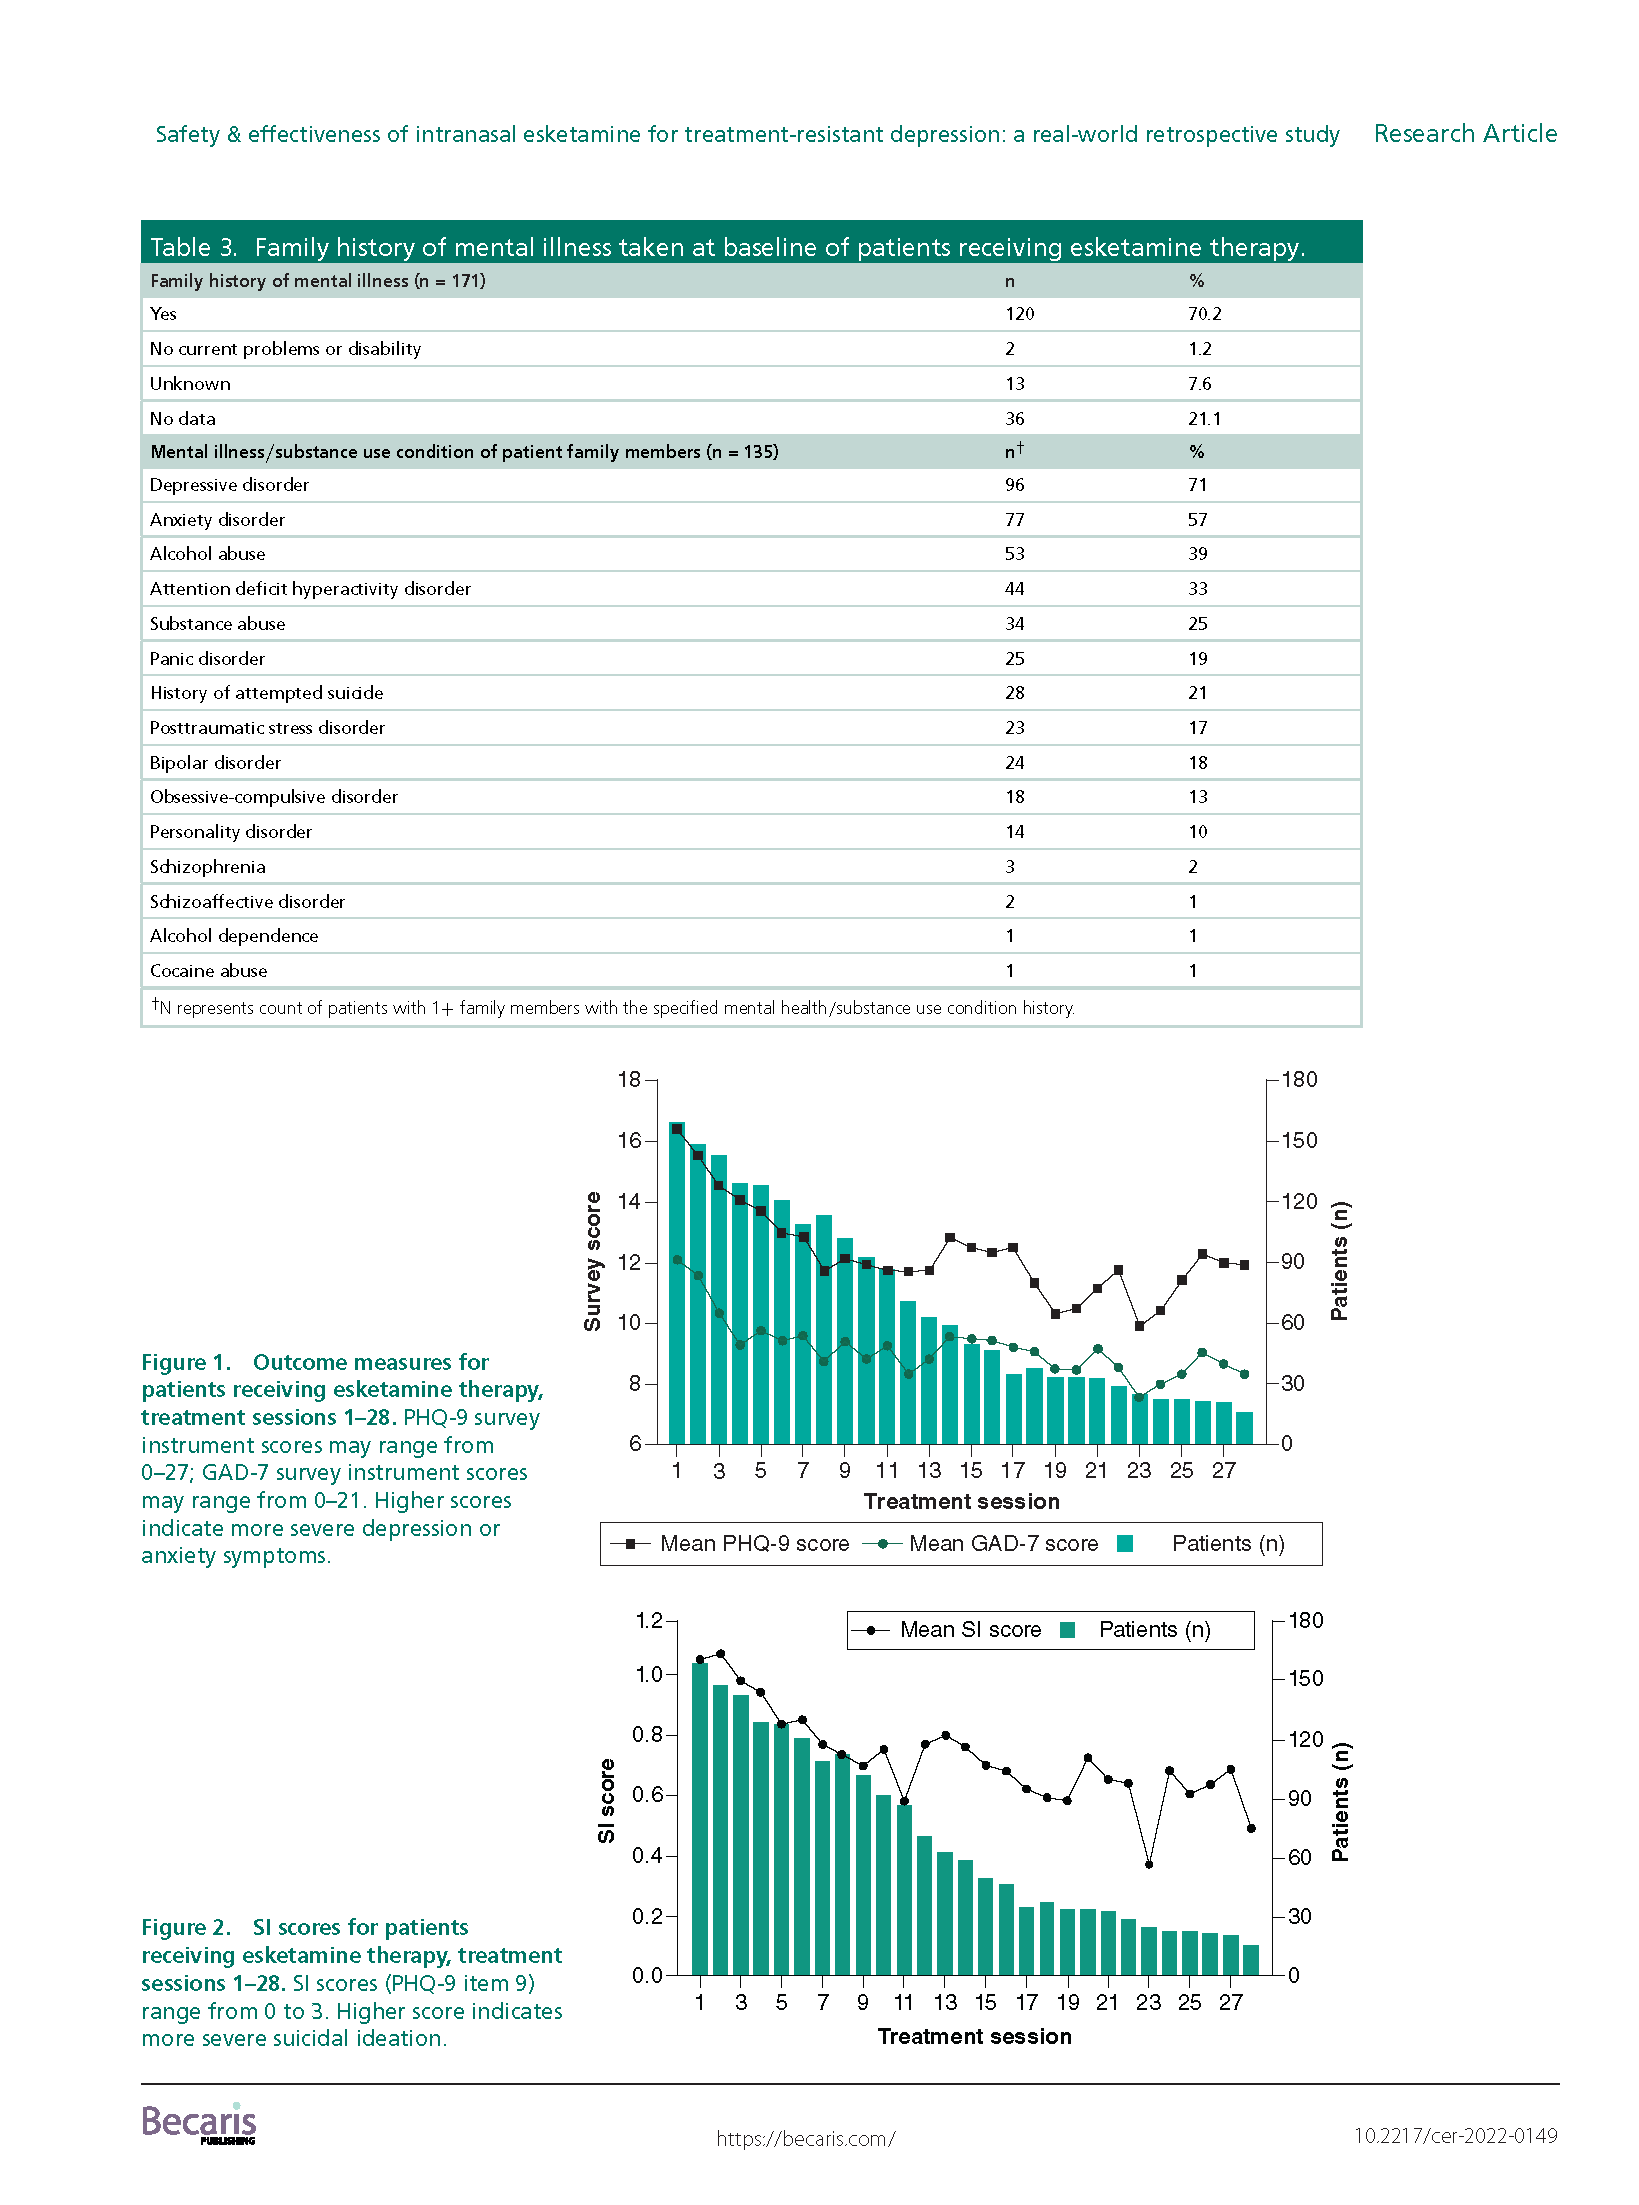 Safety and effectiveness of intranasal esketamine for TRD_a real-world retrospective study_Brendle 2022 (1)_Page_07.png